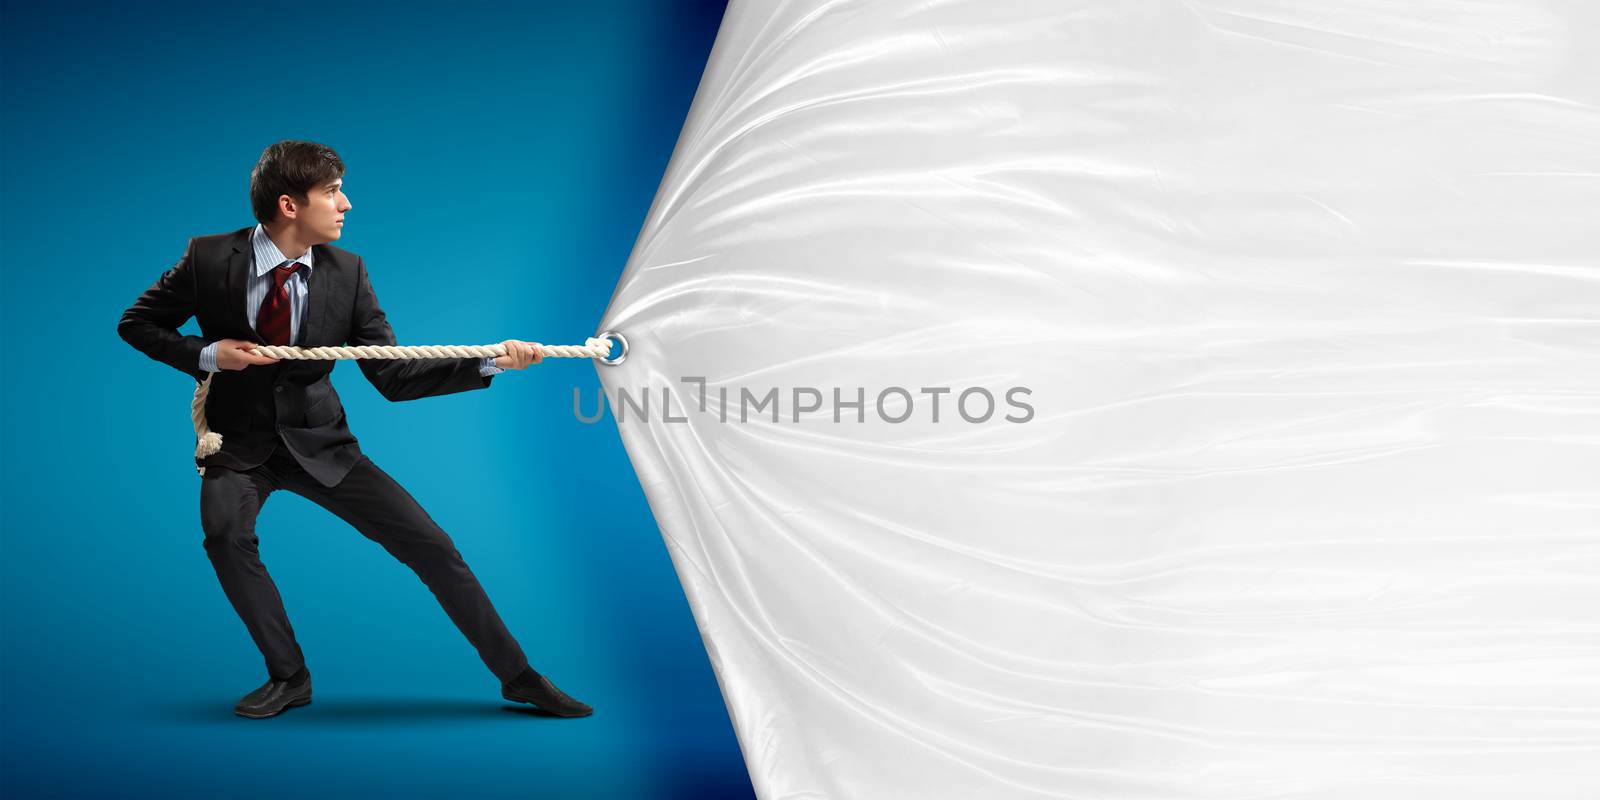 Abstract light blue background with various objects